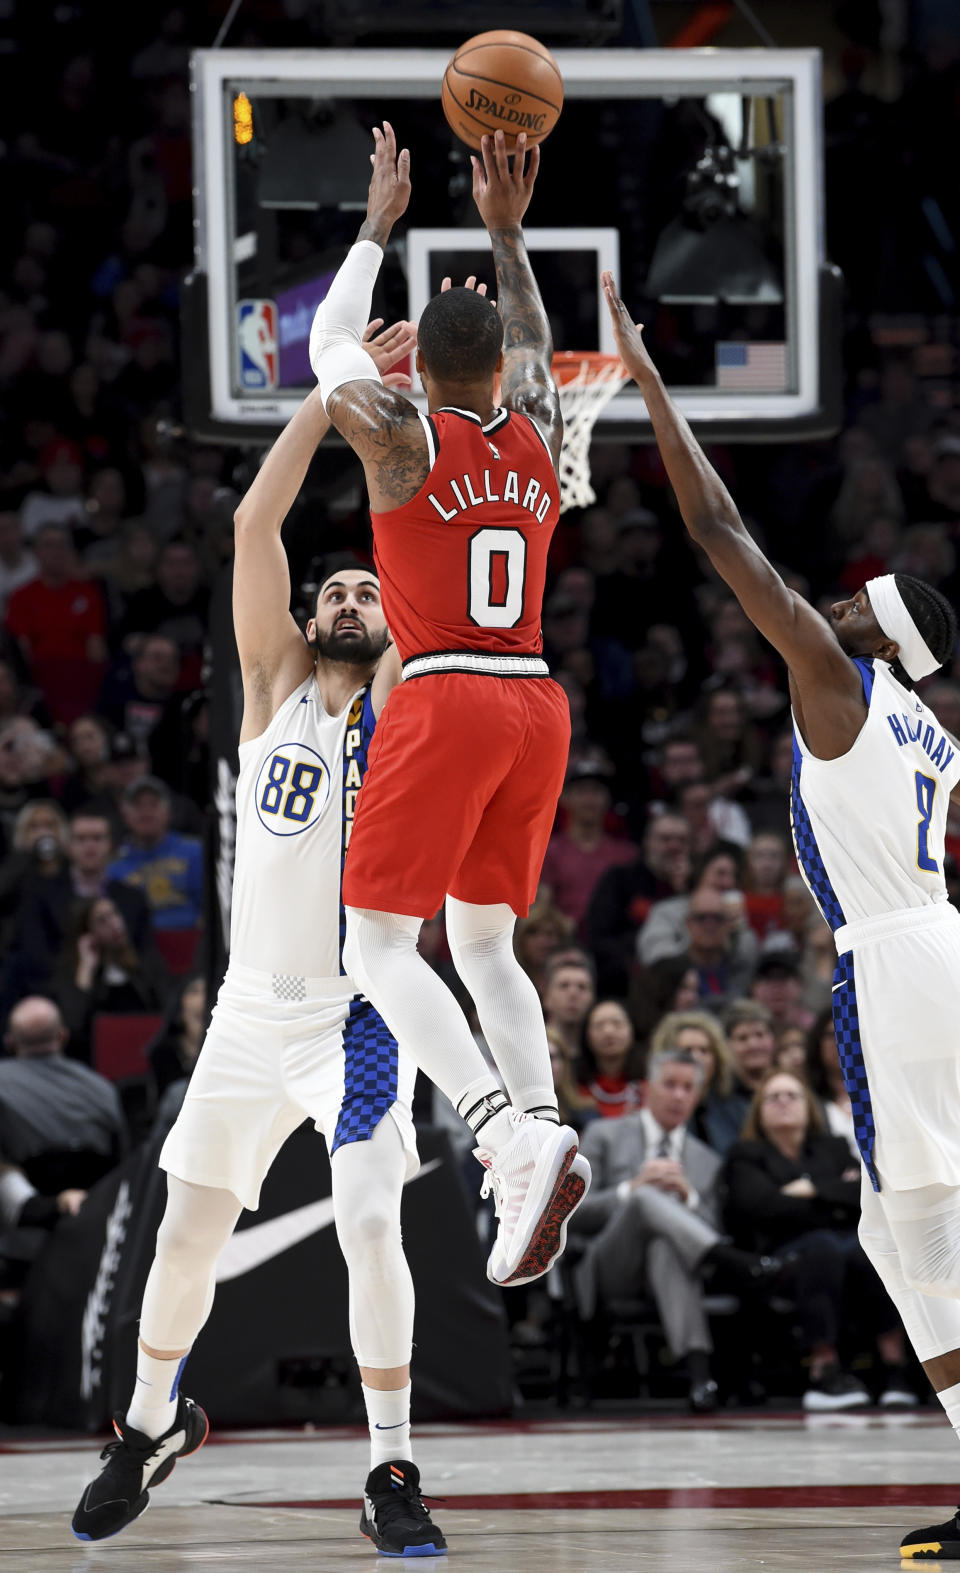 Portland Trail Blazers guard Damian Lillard, center, hits a shot over Indiana Pacers center Goga Bitadze, left, and Indiana Pacers forward Justin Holiday, right, during the first half of an NBA basketball game in Portland, Ore., Sunday, Jan. 26, 2020. (AP Photo/Steve Dykes)